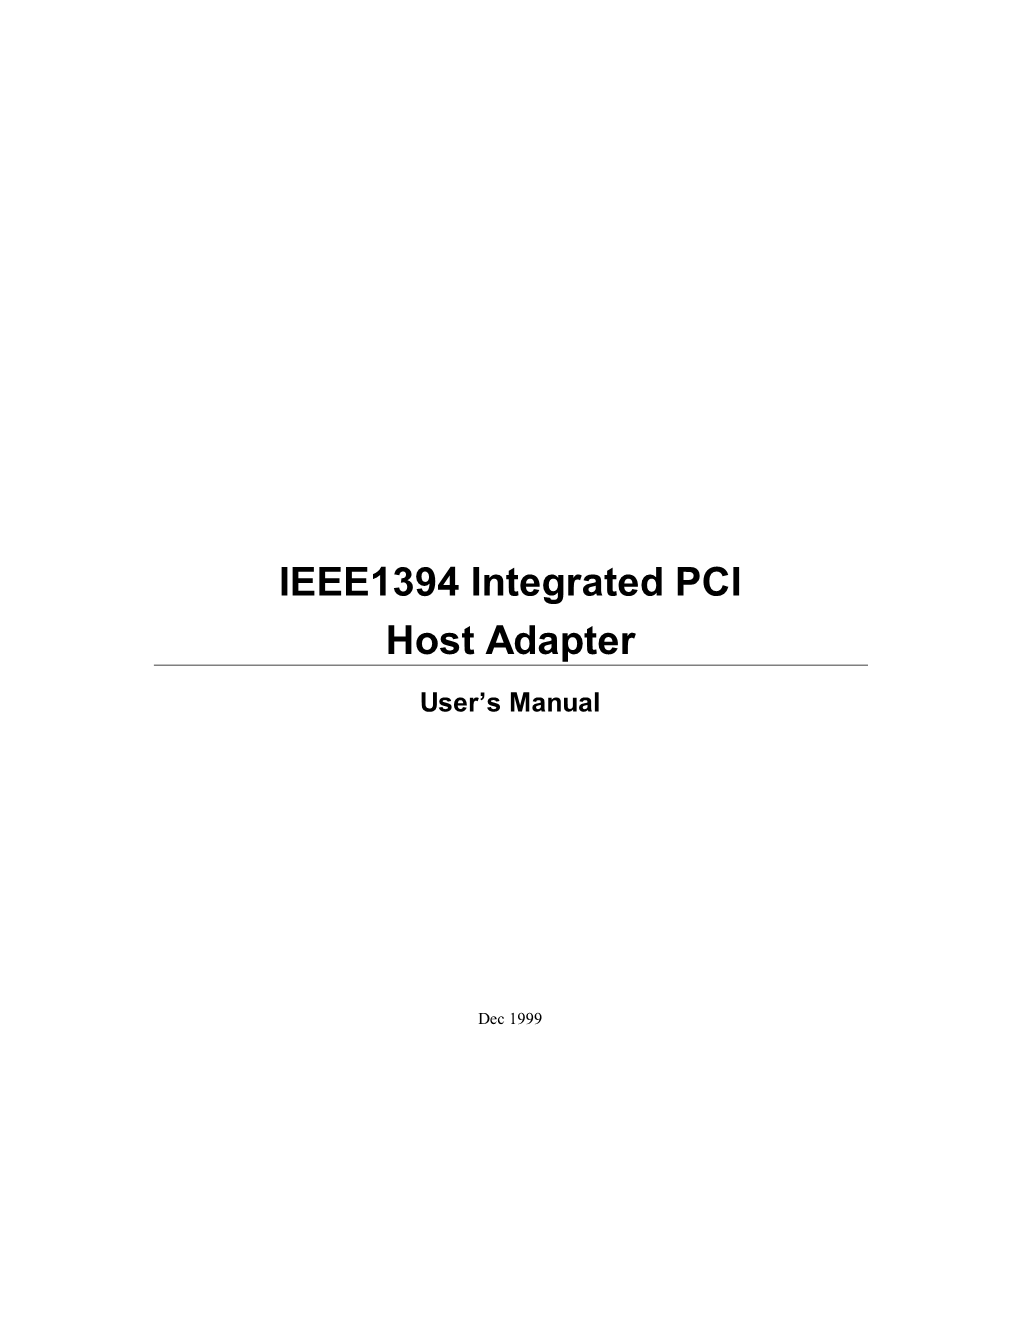 IEEE1394 Integrated PCI Host Adapter